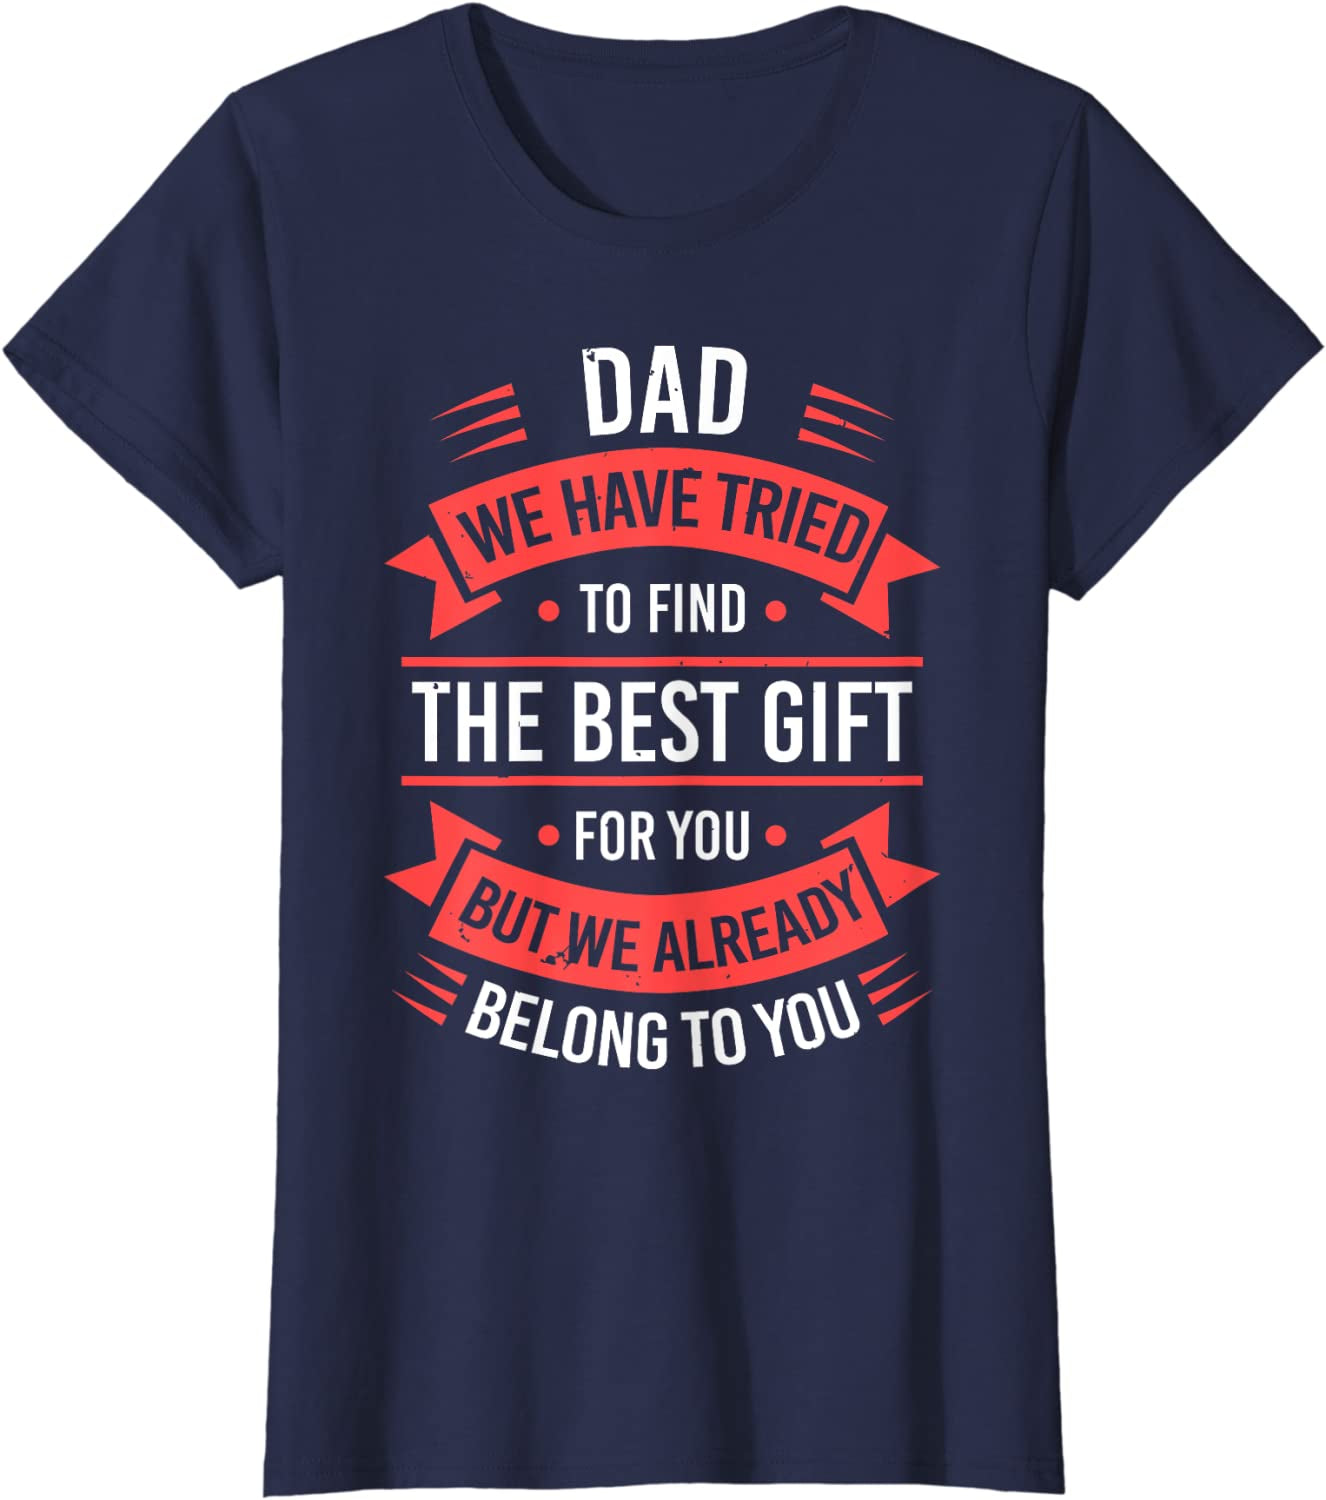 Fathers Day Shirt For Dad From Daughter Son Wife Funny Dad T-Shirt